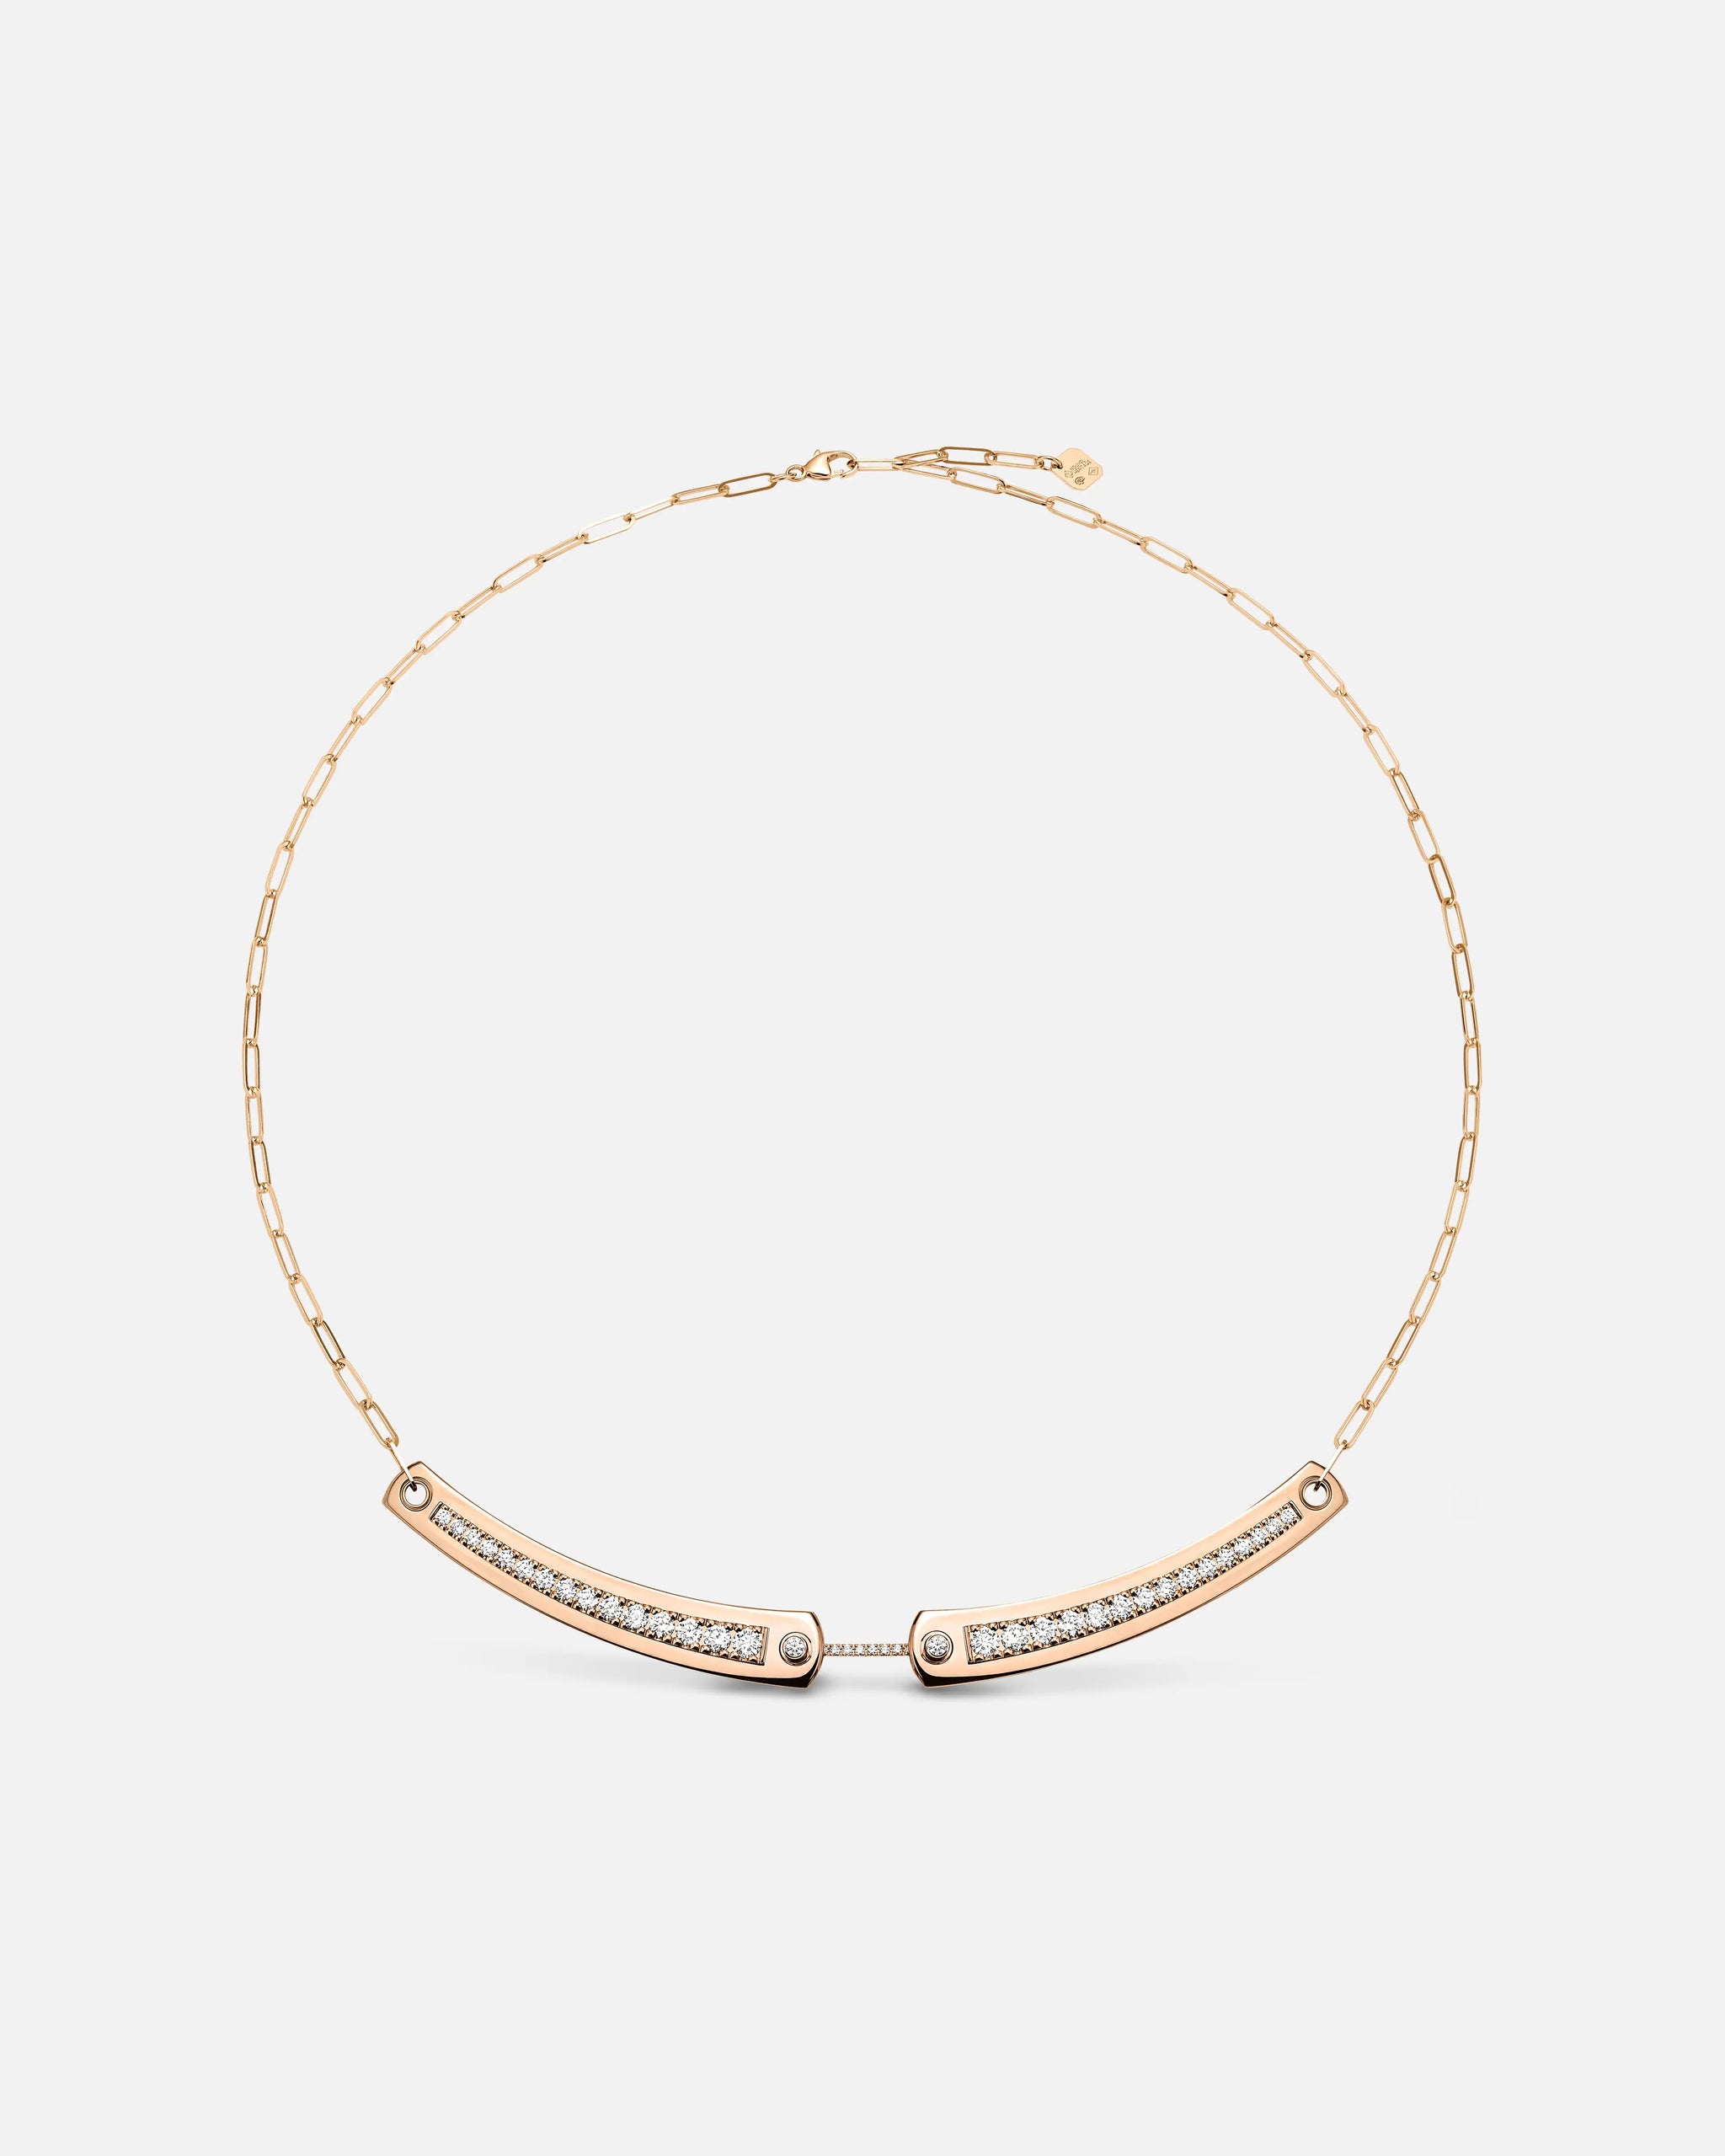 Tuxedo Mood Necklace in Rose Gold - 1 - Nouvel Heritage